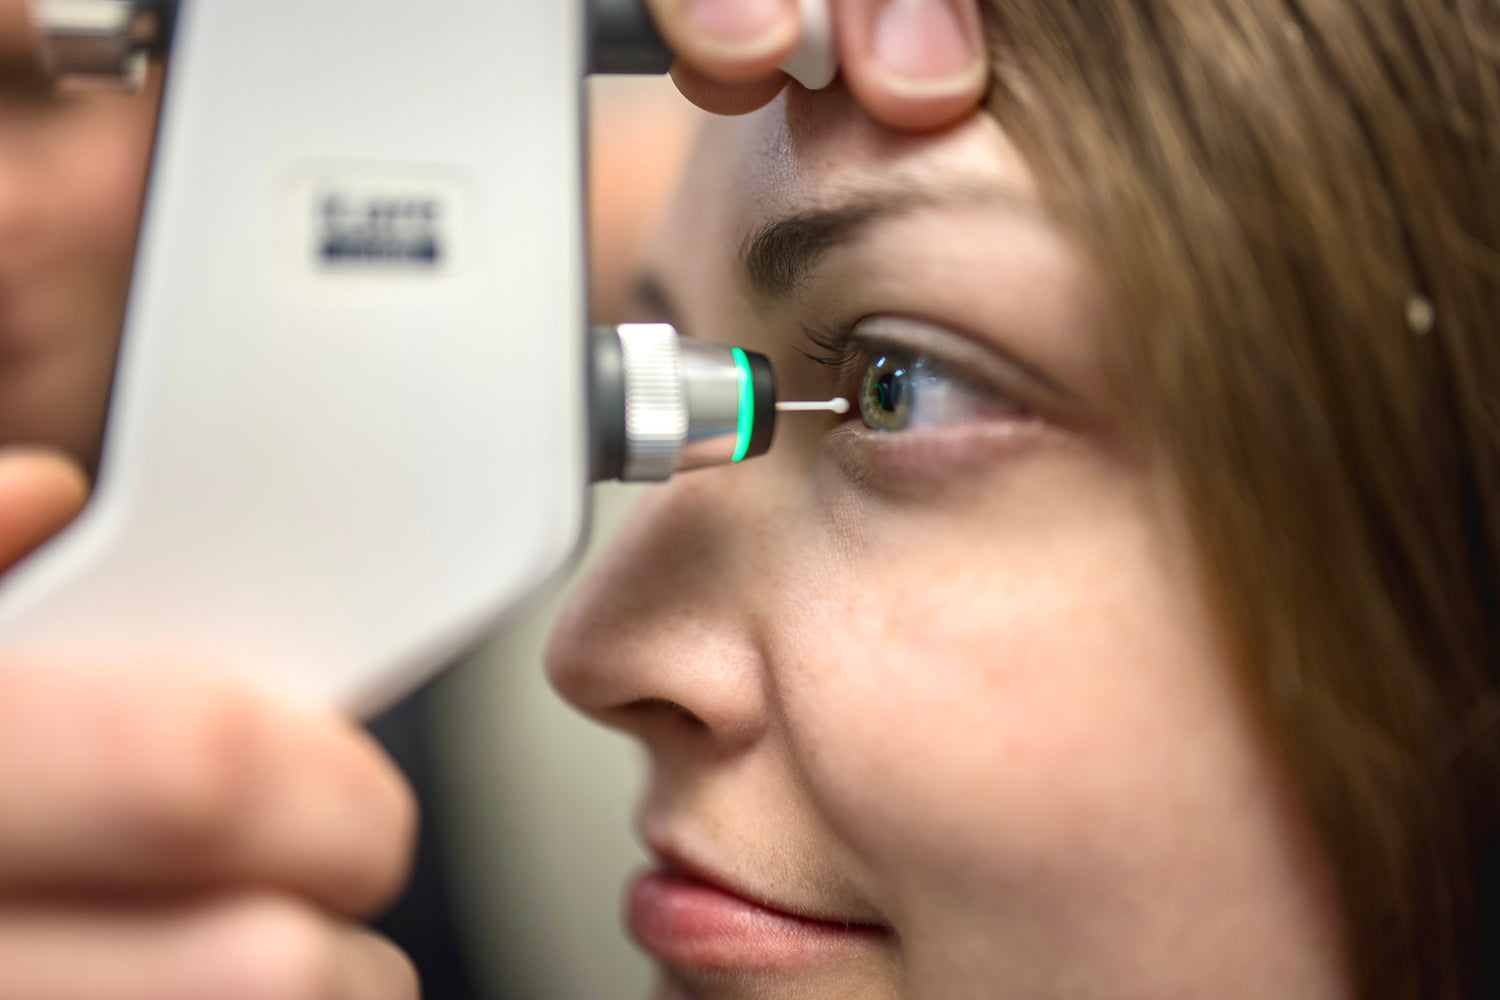 Close up of a woman having their eye pressure checked by a small instrument holding a probe in front of her eye.